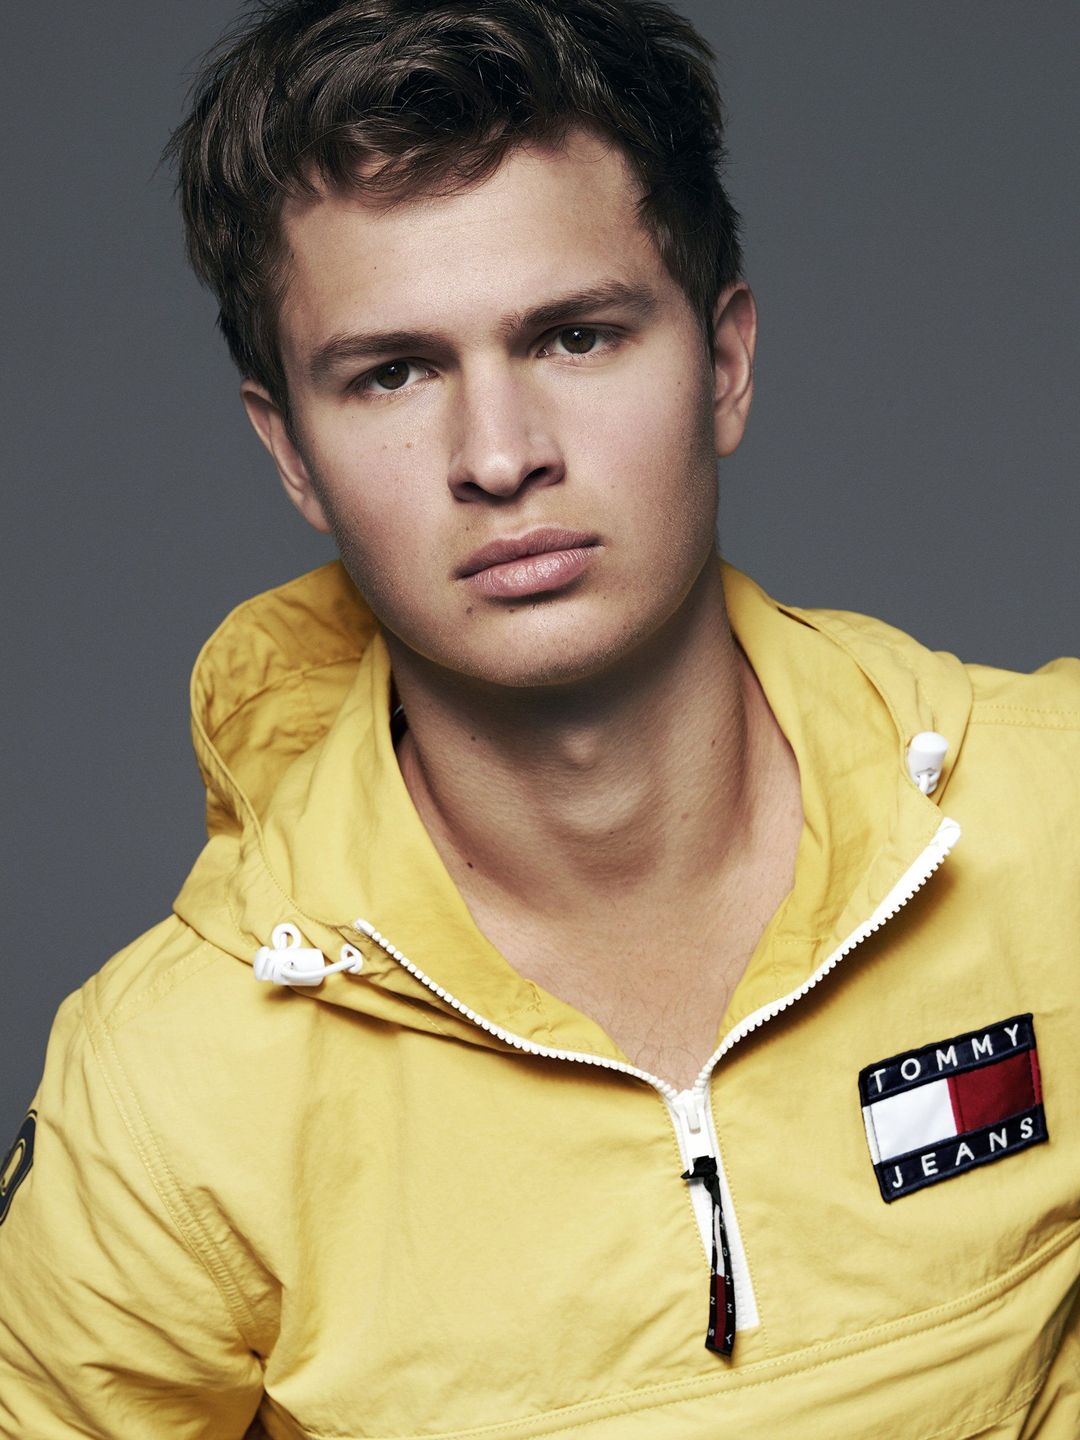 Ansel Elgort who are his parents